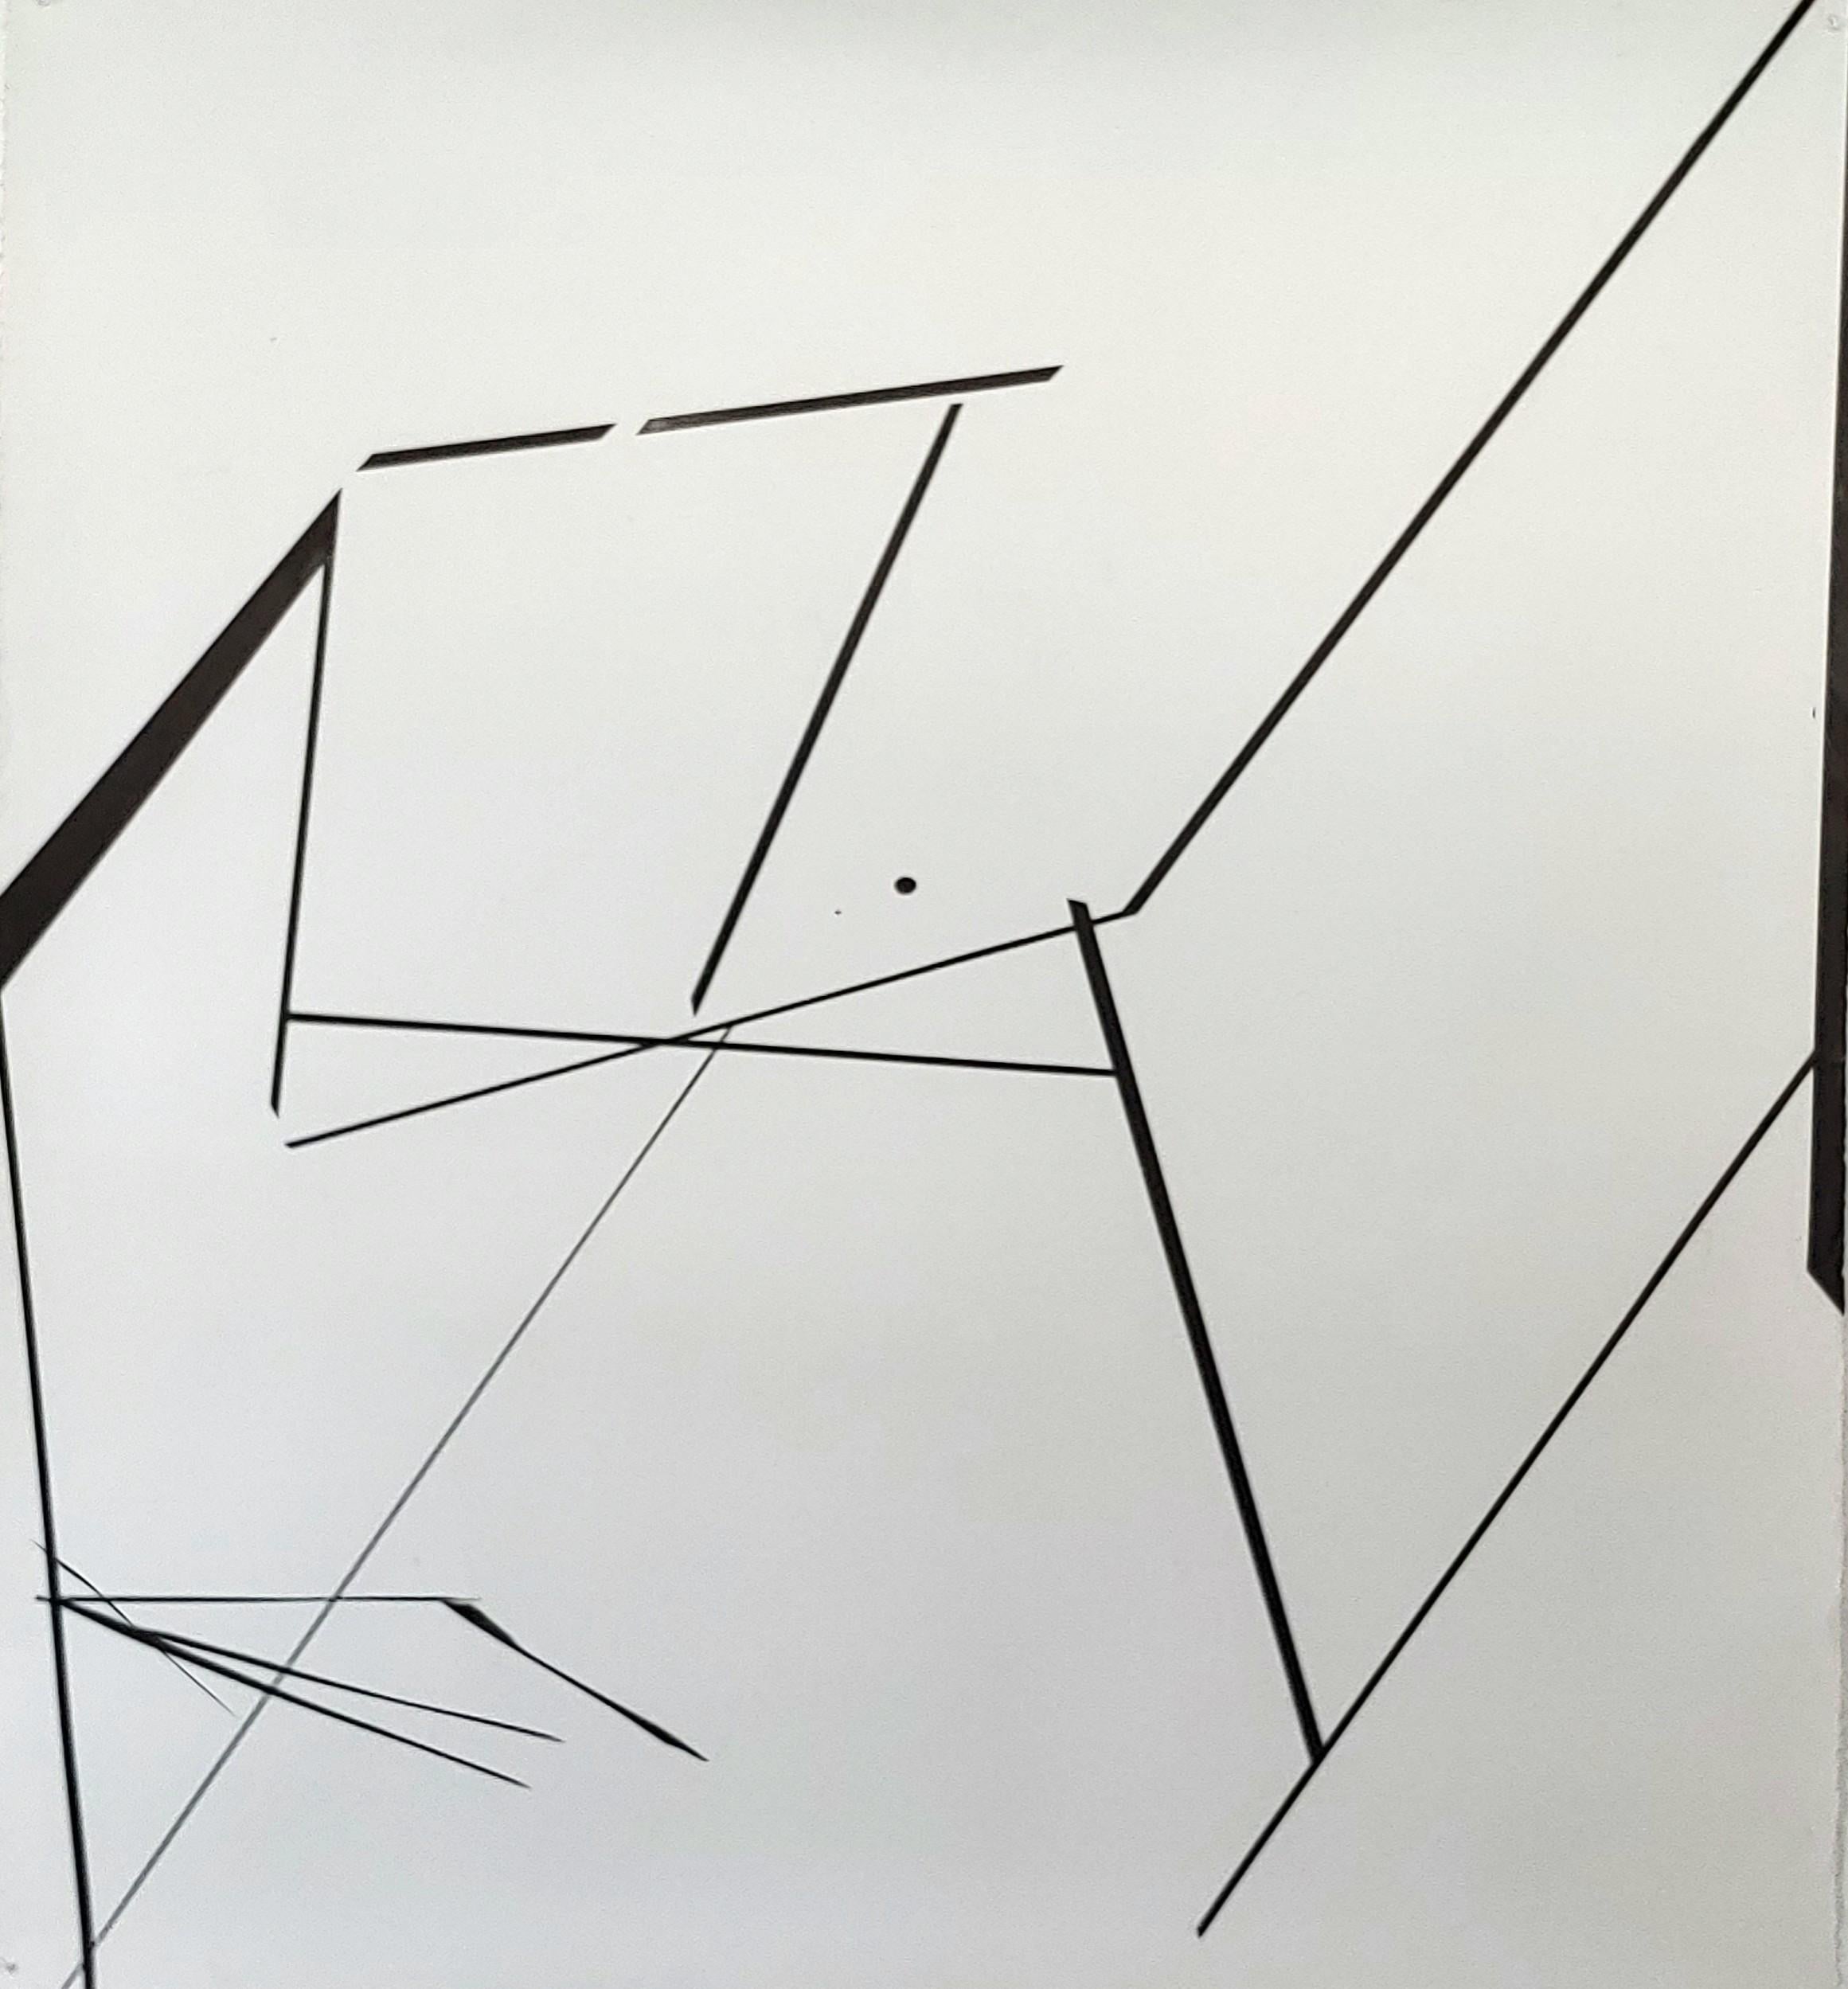 Ronald Rupert Santos Abstract Drawing - Geometric, abstract, monochromatic, black & white, linear, ink on paper drawing